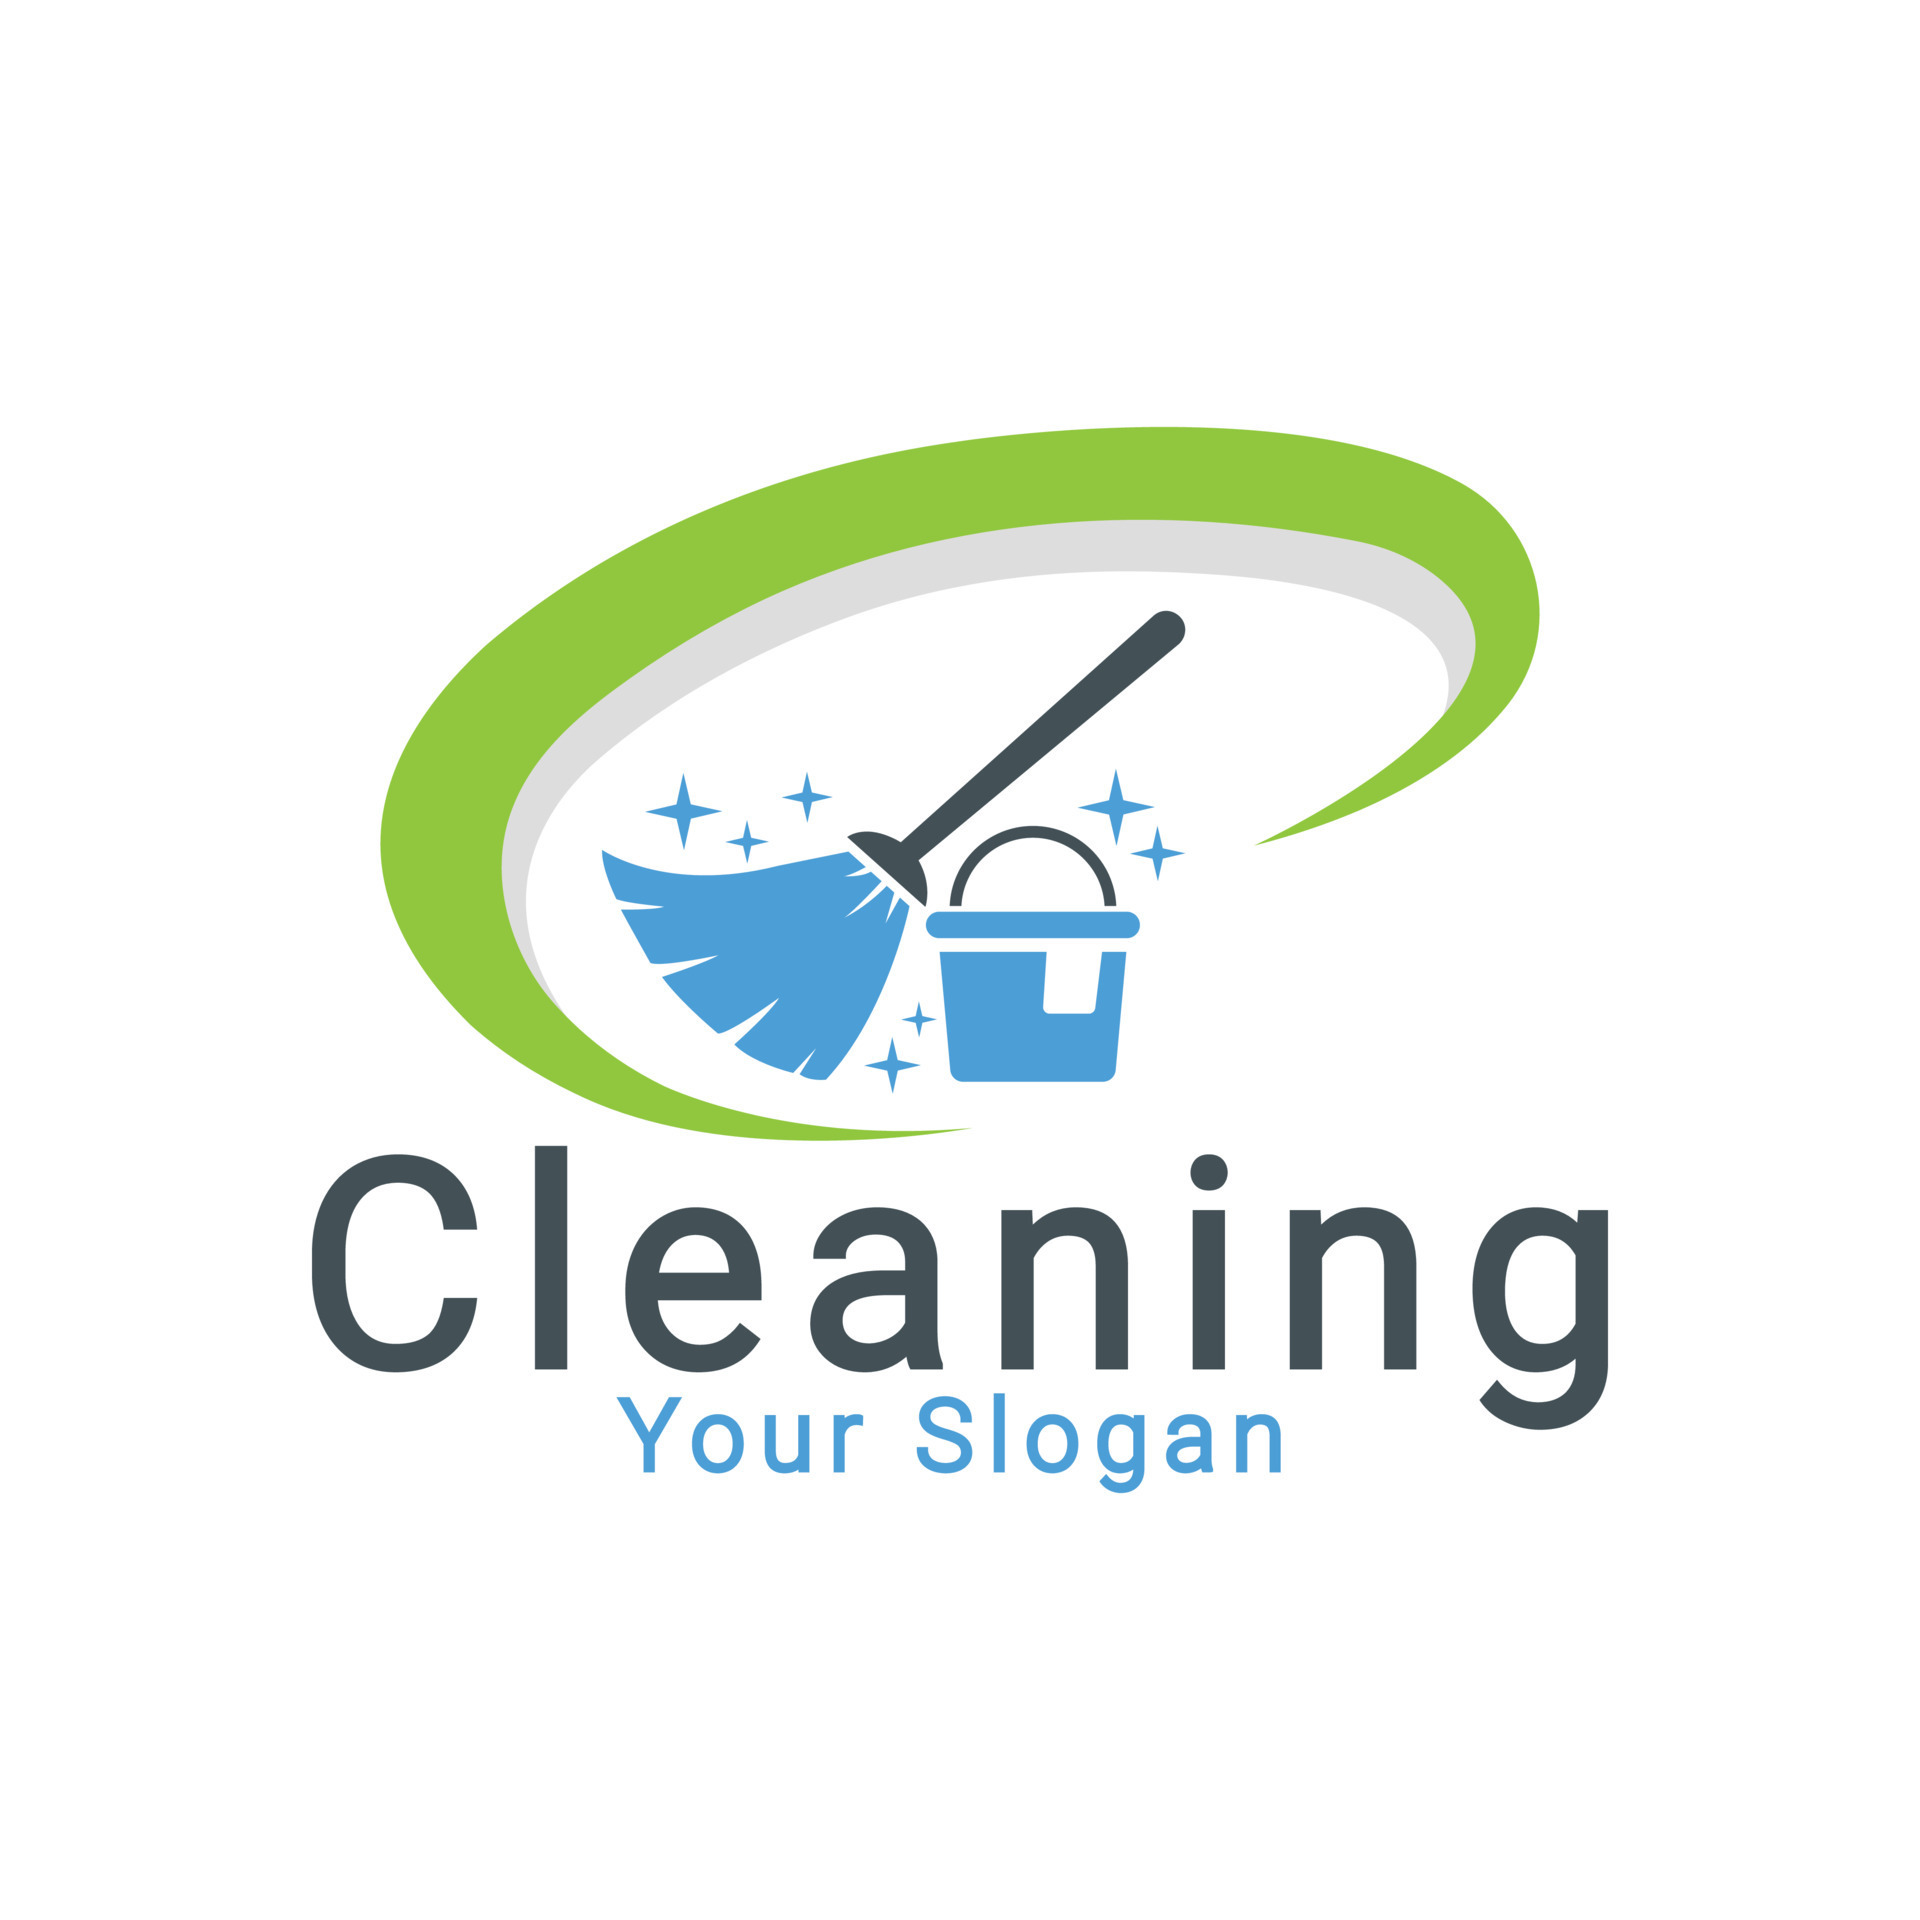 https://static.vecteezy.com/system/resources/previews/010/533/060/original/house-cleaning-logo-cleaning-service-logo-cleaning-company-logo-house-wash-logo-template-free-vector.jpg